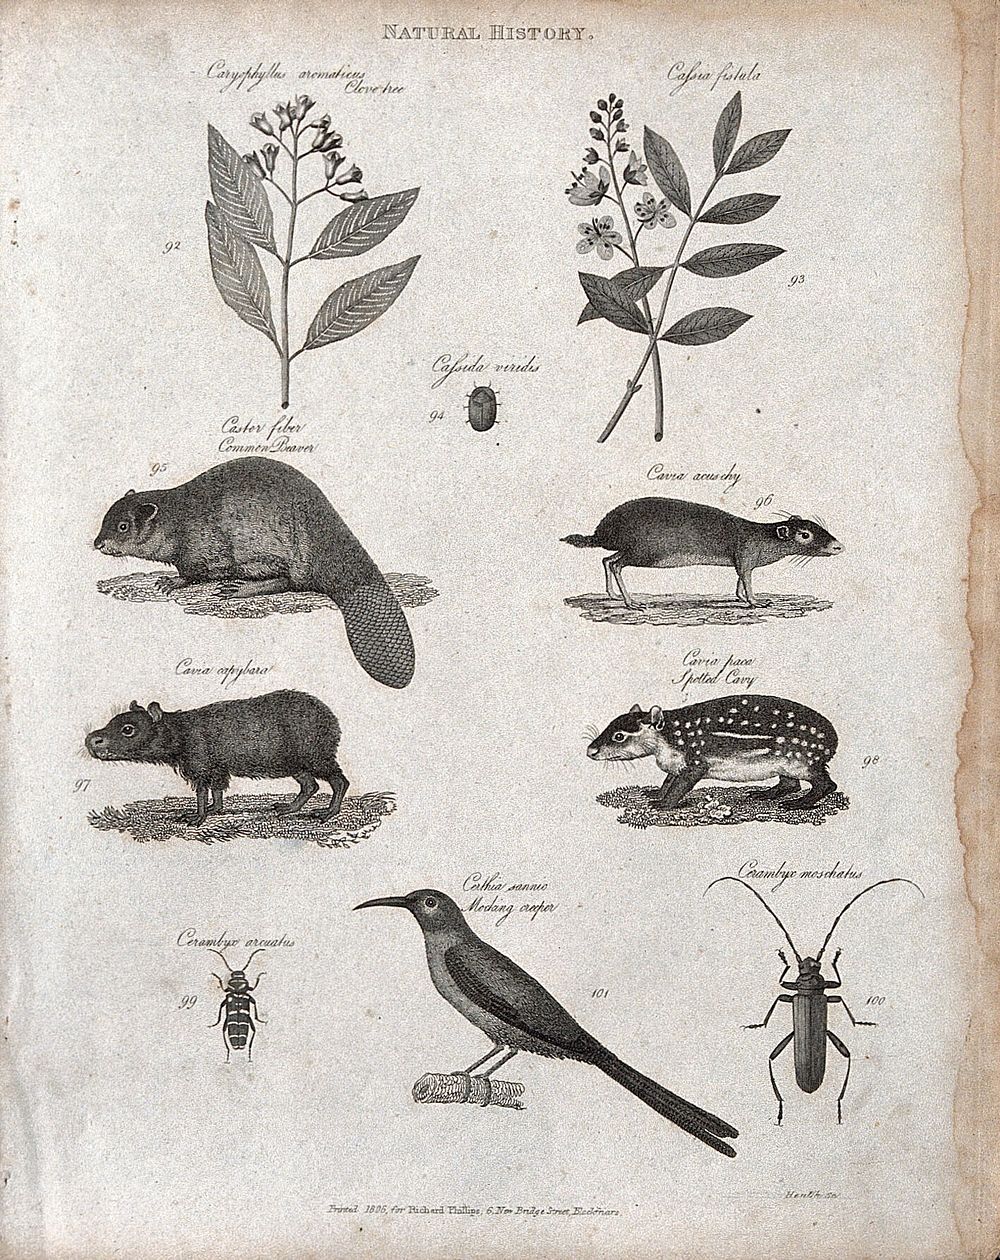 Above, a sprig of a clove tree, a beetle, two sprigs of a cassia tree bearing leaves from which senna is extracted, a beaver…